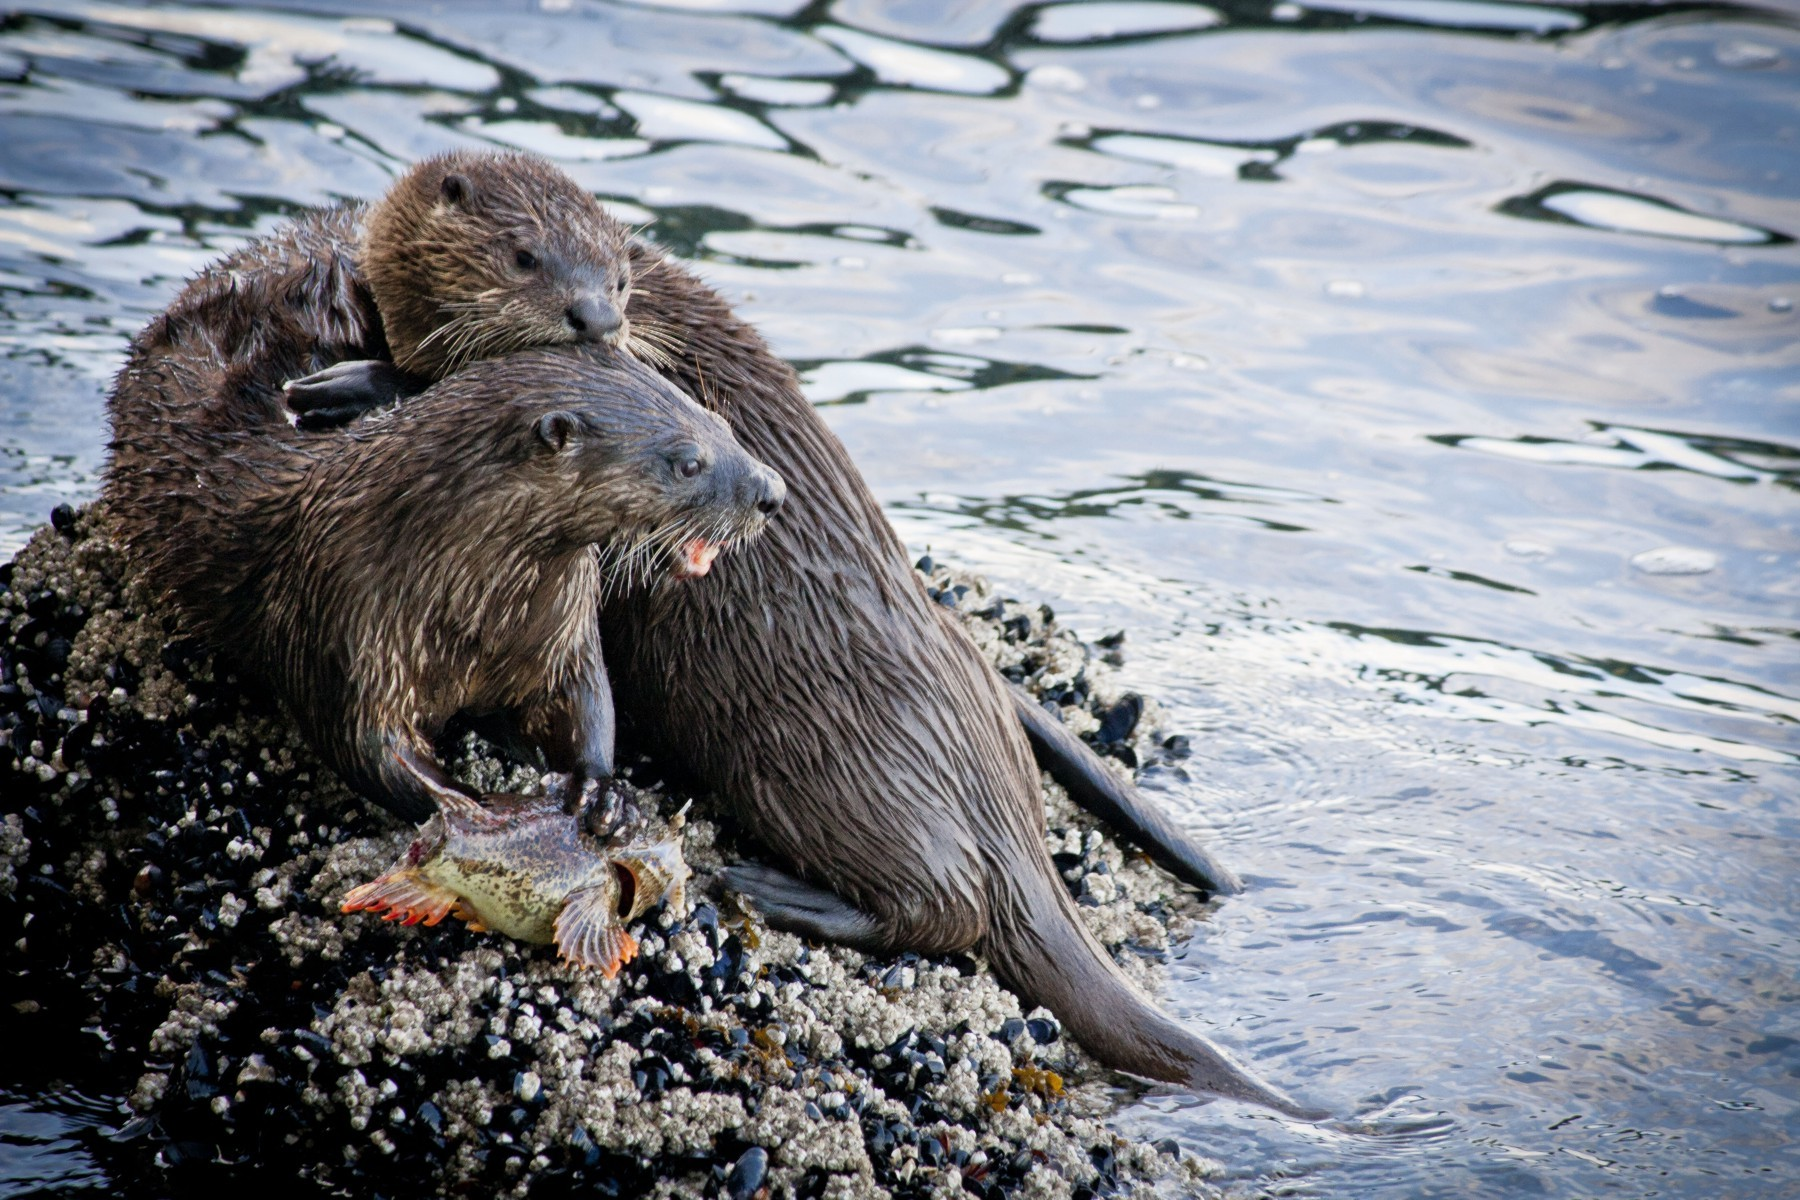 A rock surrounded by rippling water. On the rock, a North American River Otter is holding a fish down with one paw while facing right with its mouth open; a second otter is climbing on top of it, and holding its left ear in its mouth.